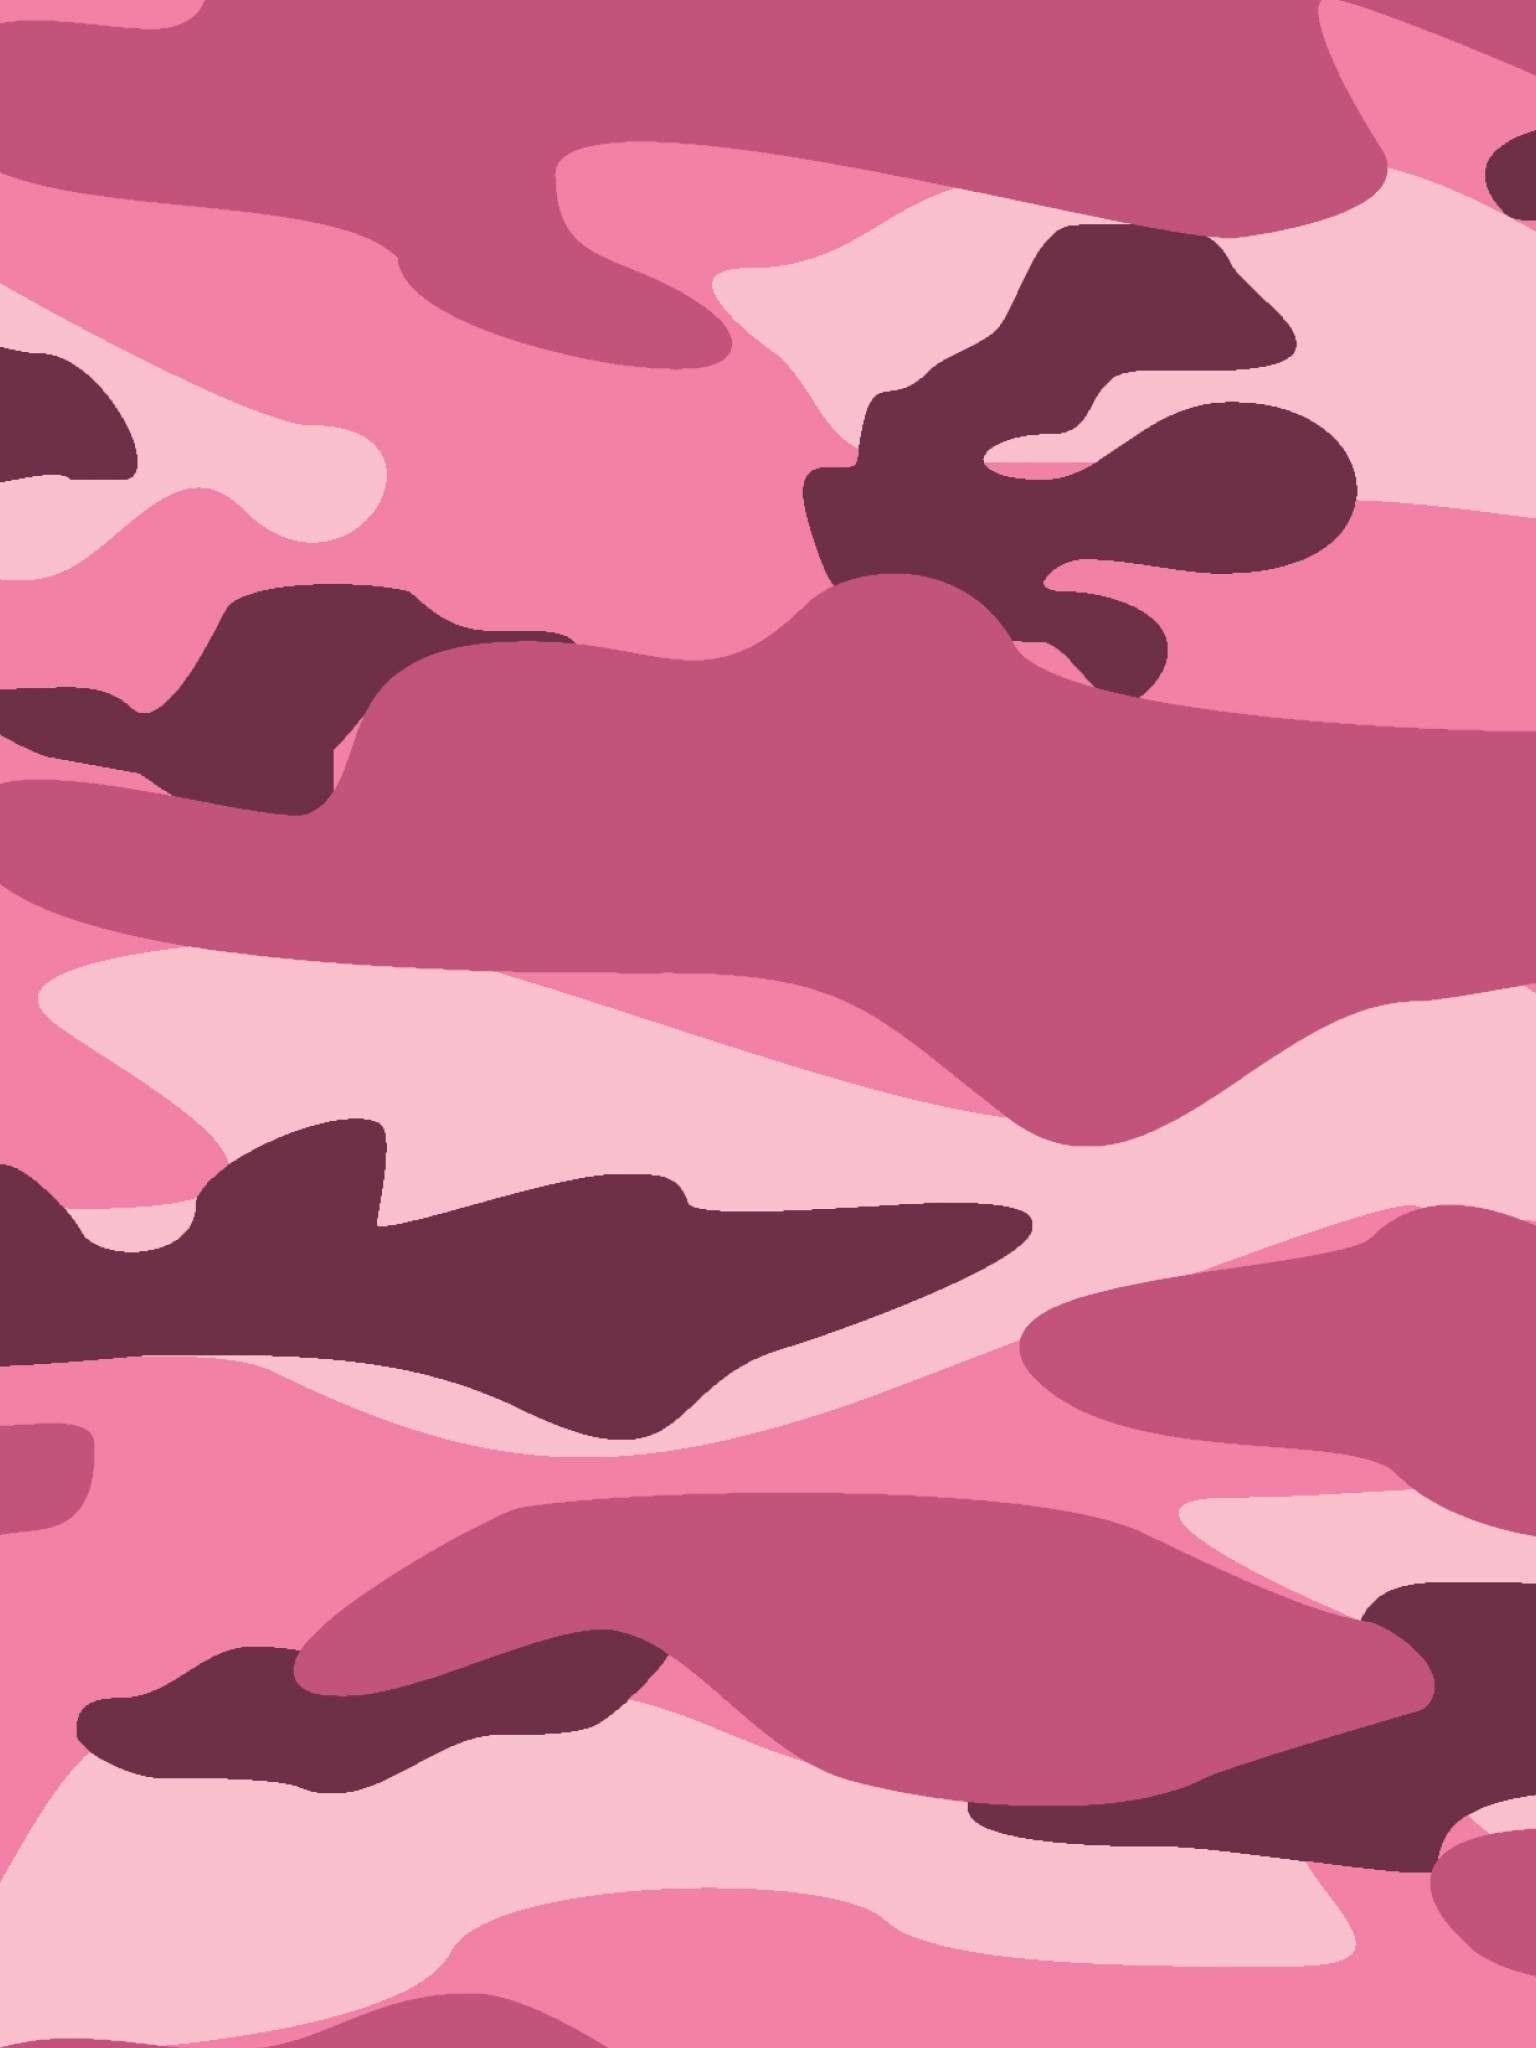 Free download Camouflage Pink 620x413 for your Desktop Mobile  Tablet   Explore 45 Pink Camo Wallpaper  Pink Camo Computer Wallpaper Pink Camo  Desktop Wallpaper Pink Camo iPhone Wallpaper